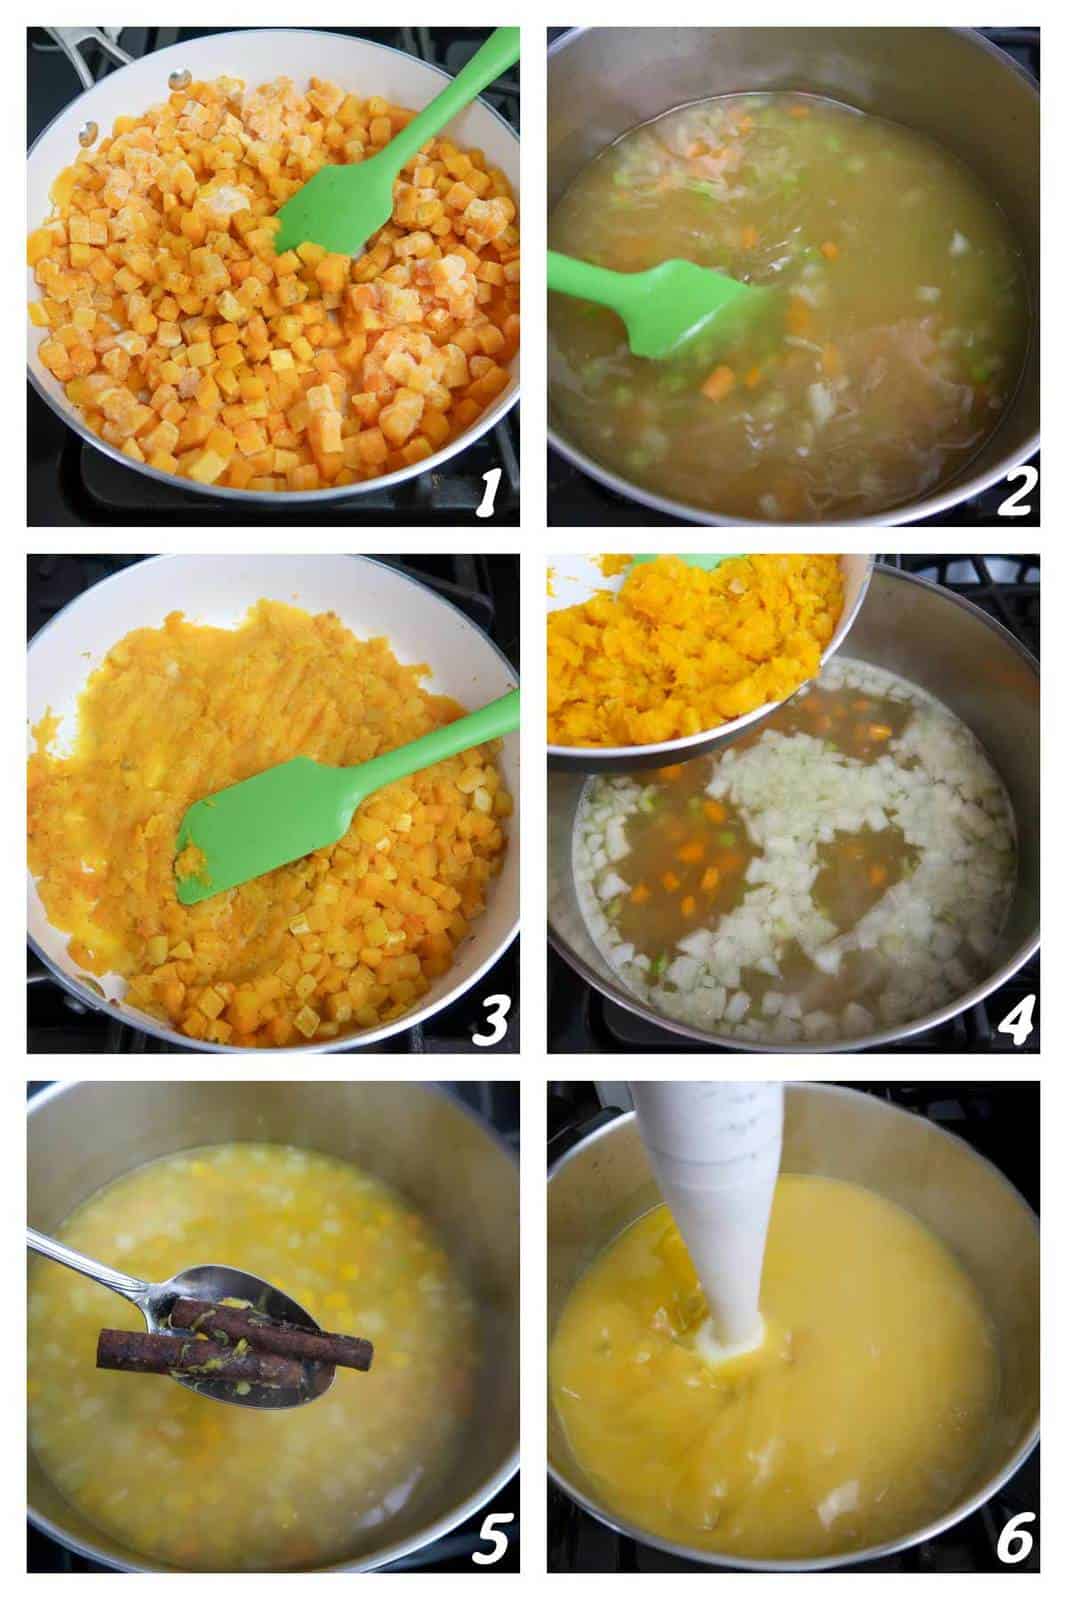 Six panel collage of process shots- mixing and cooking various ingredients in a pot over the stove.